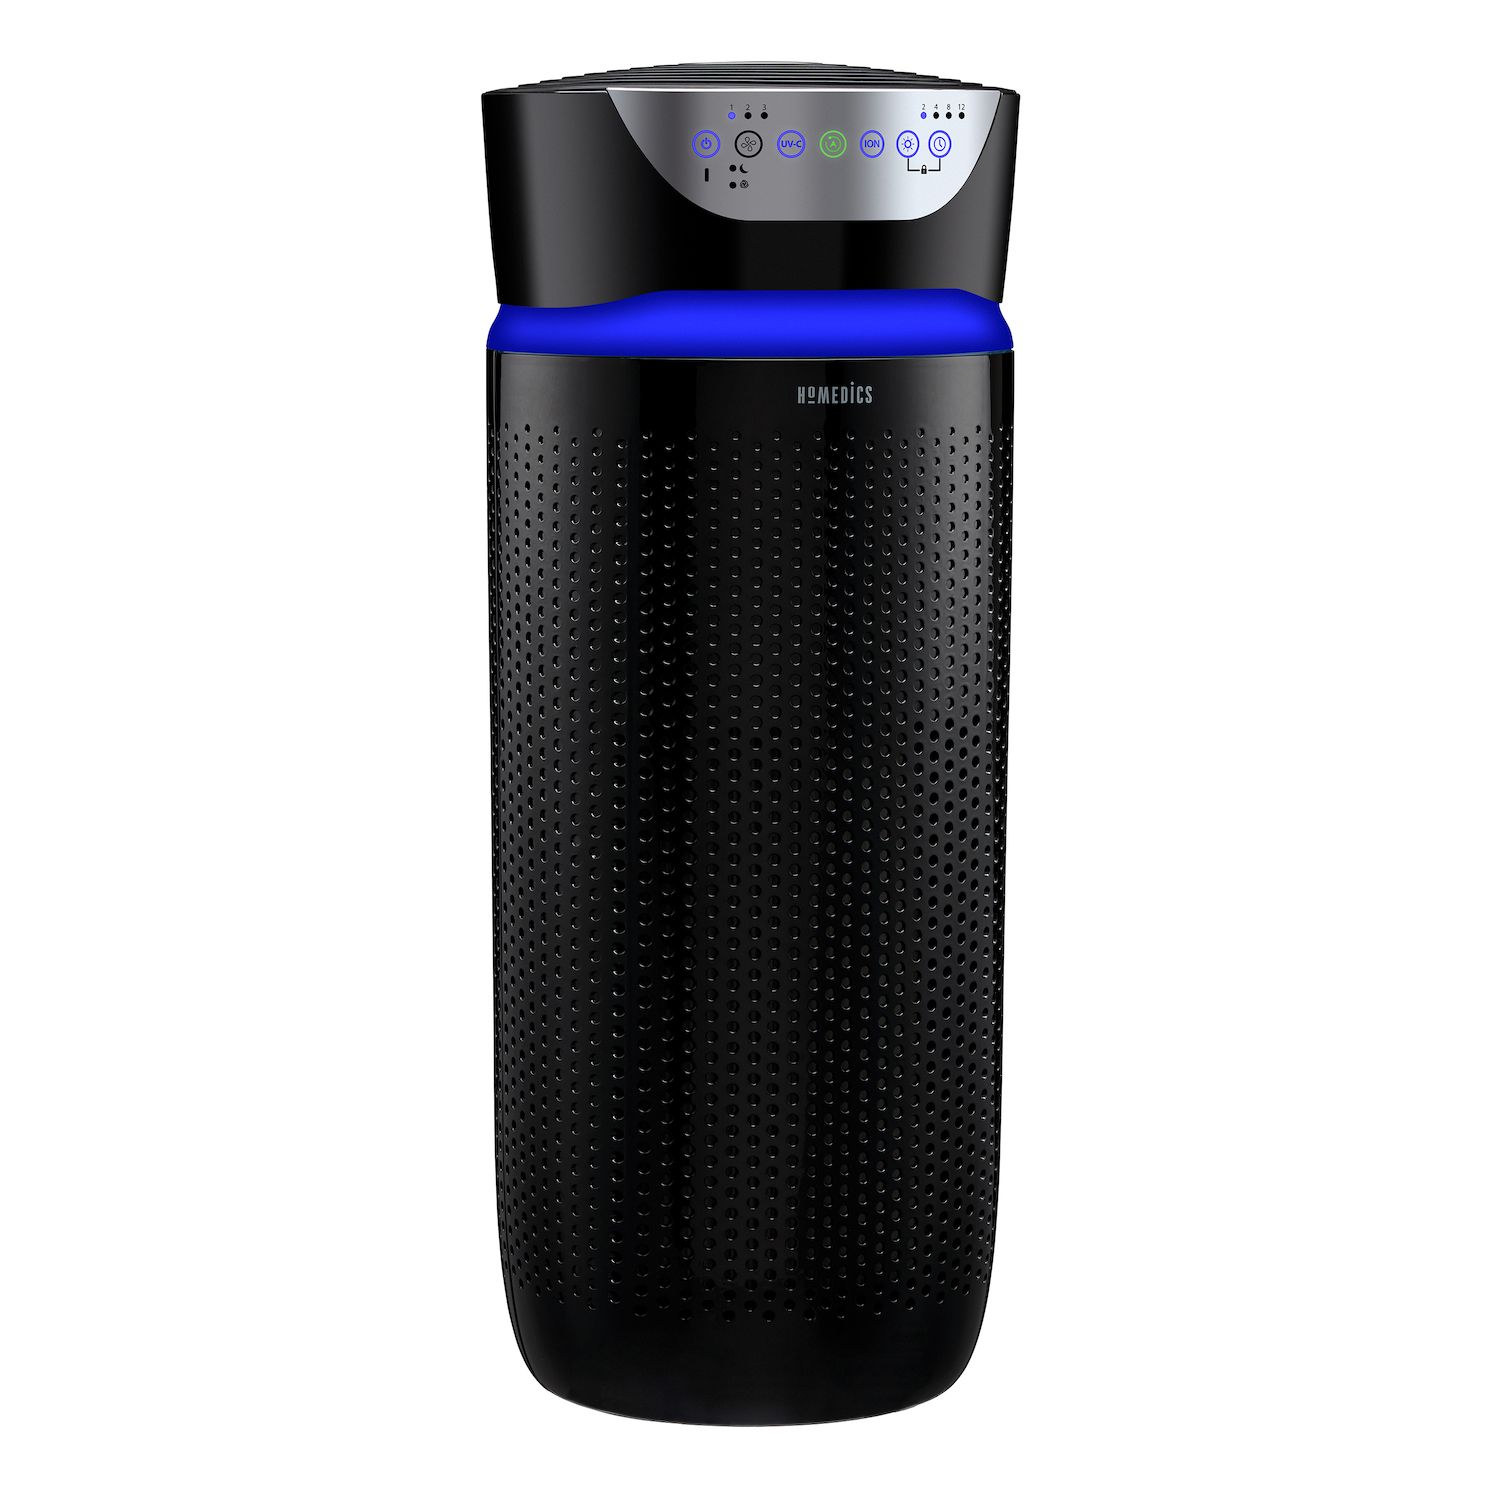 Image for HoMedics TotalClean Deluxe UV 5-in-1 Tower Air Purifier at Kohl's.